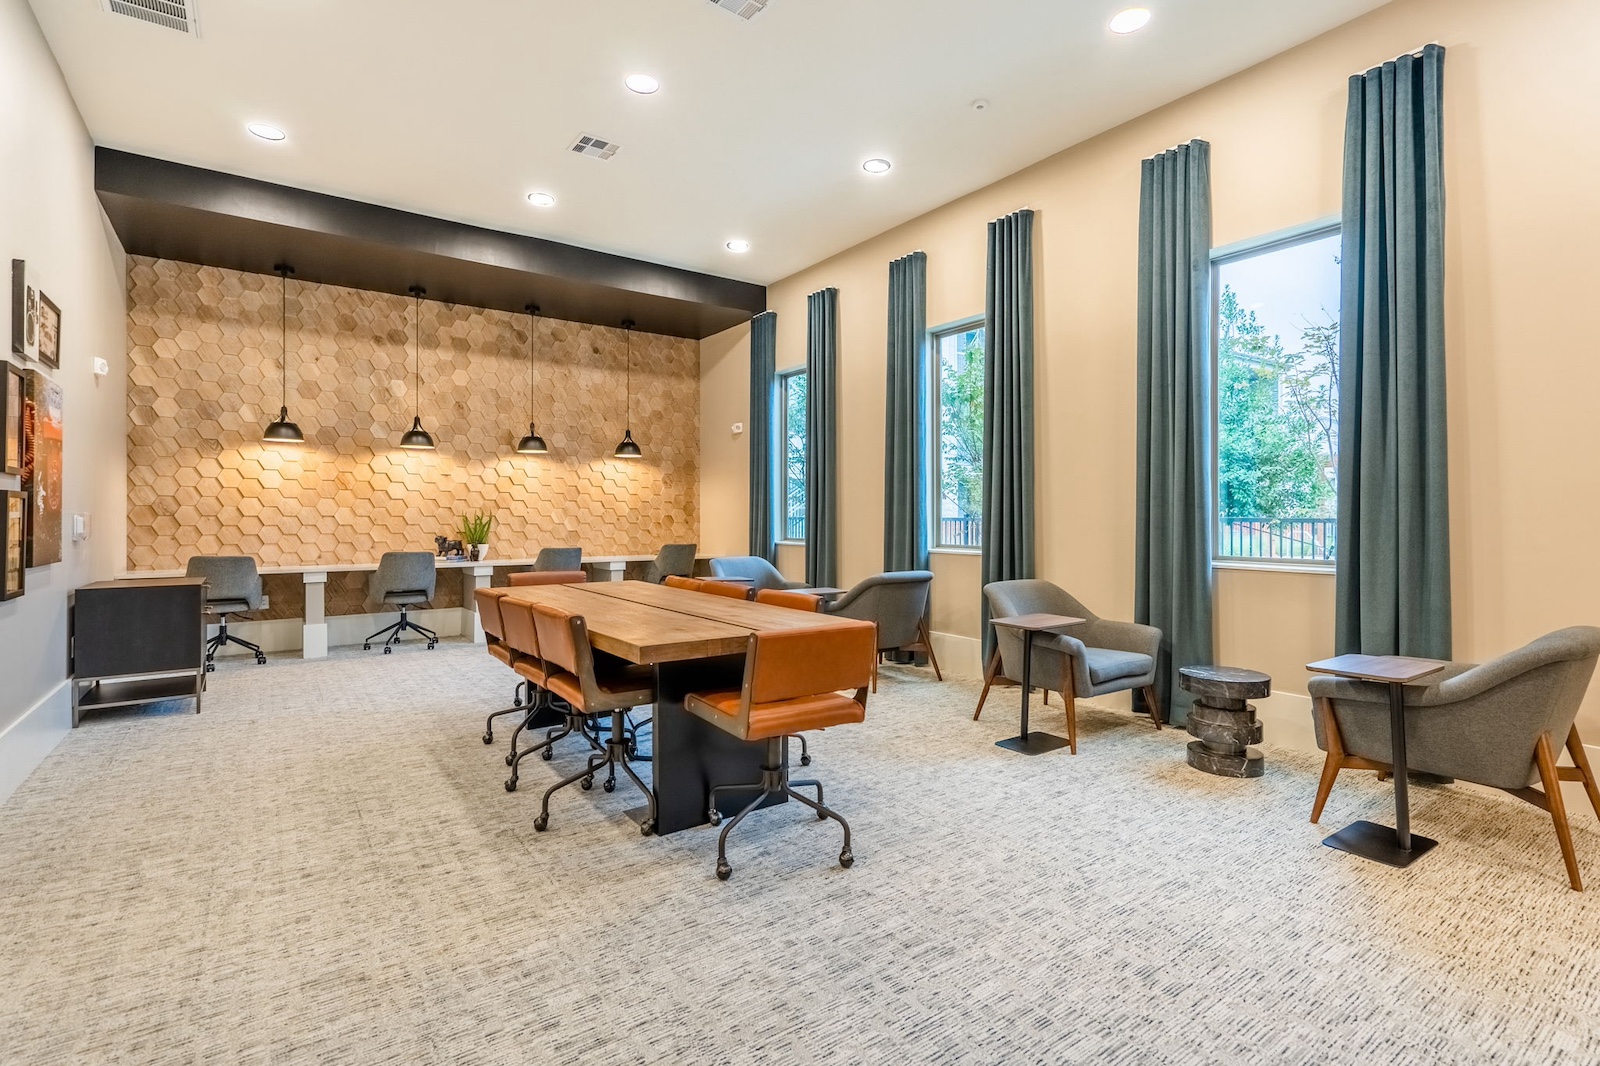 Work-Well space with a large conference room table and ample seating at our Cypress, TX apartments.